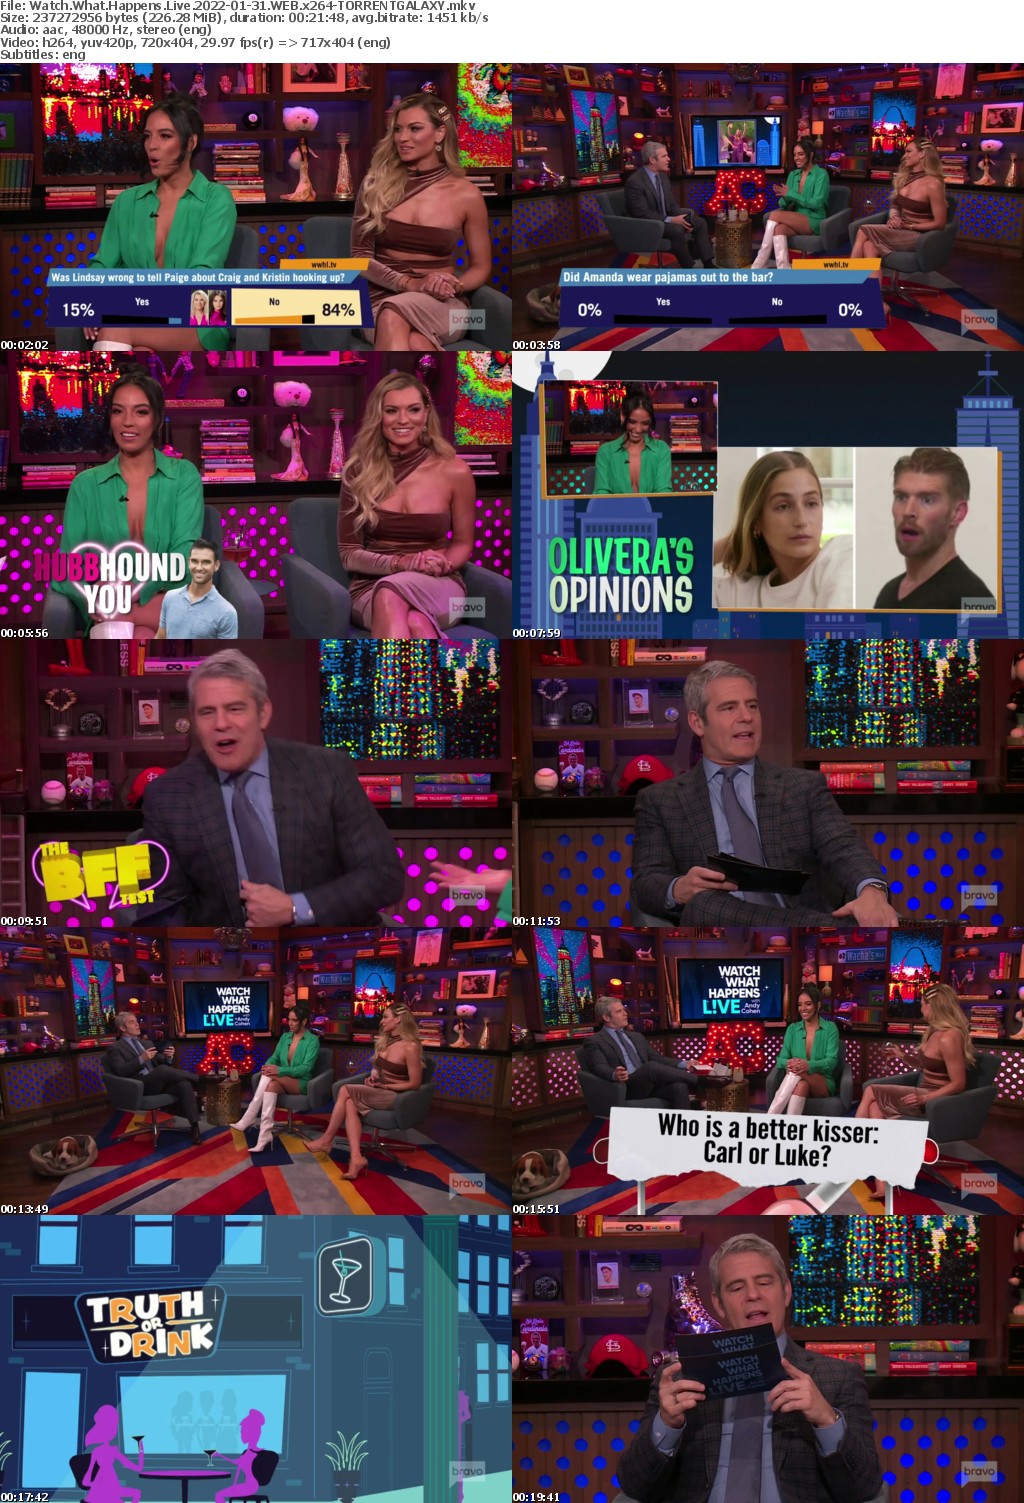 Watch What Happens Live 2022-01-31 WEB x264-GALAXY